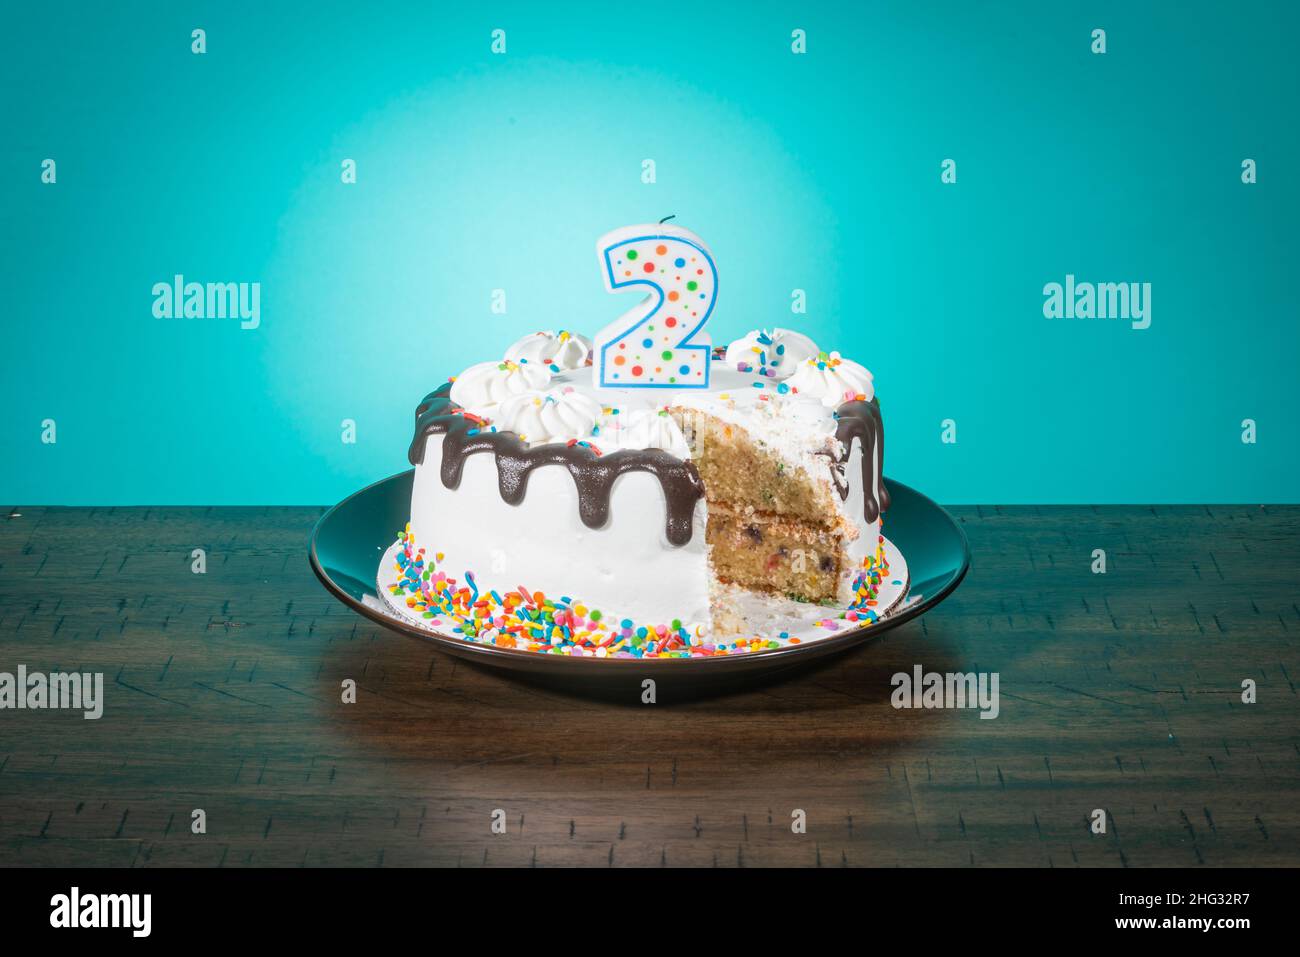 A birthday cake, missing a slice, bears a candle in the shape of the number 2. Stock Photo